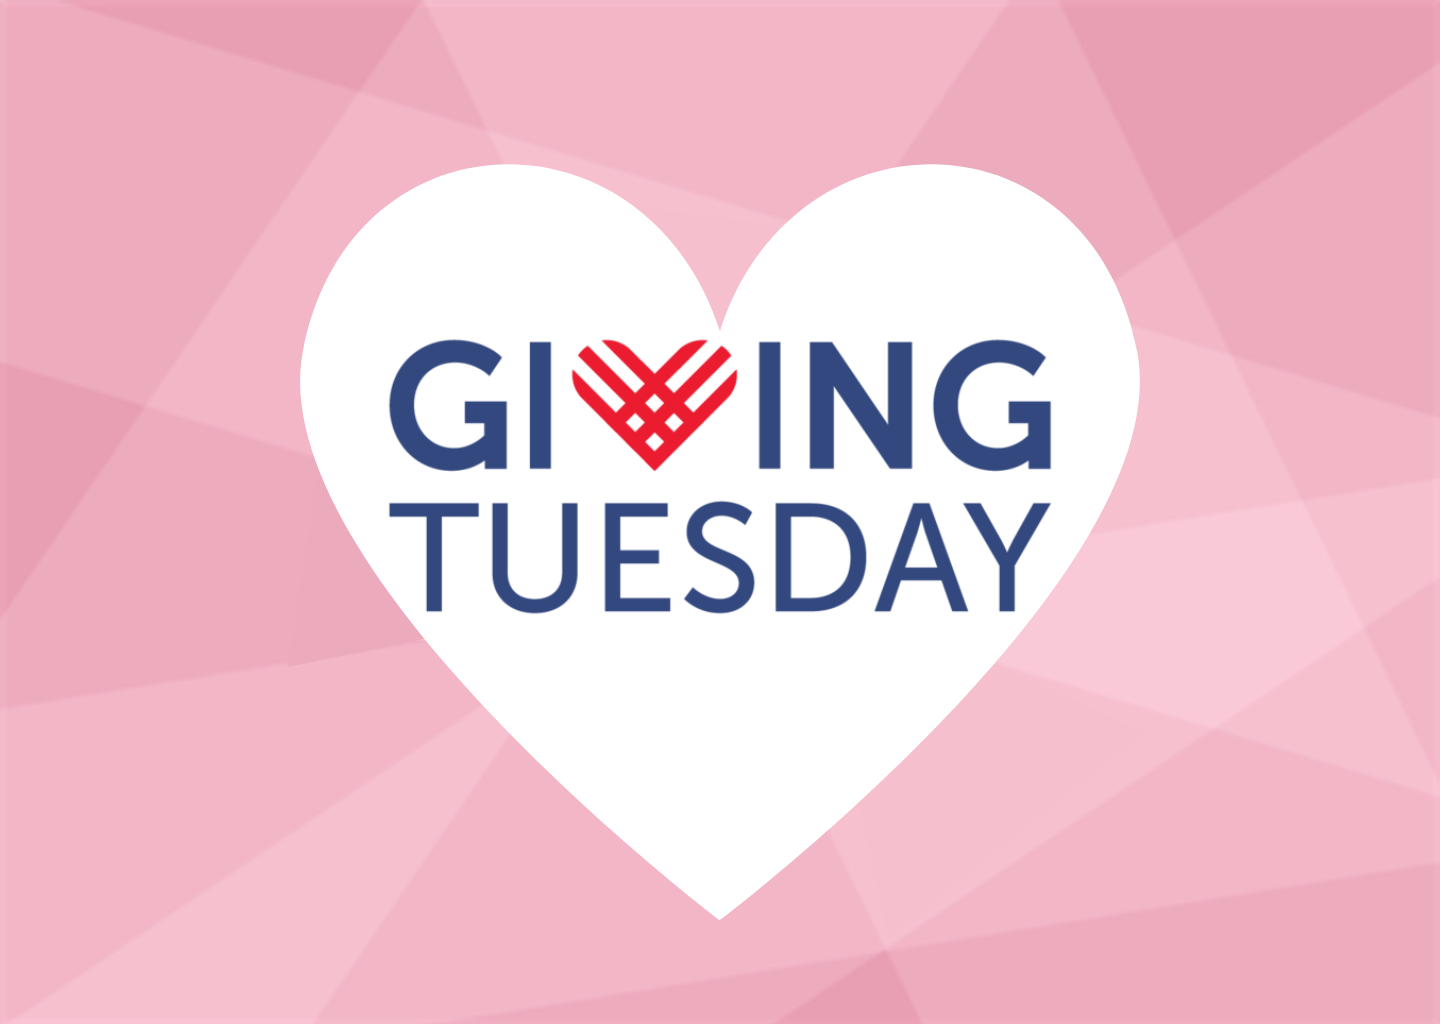 Donor: Giving Tuesday